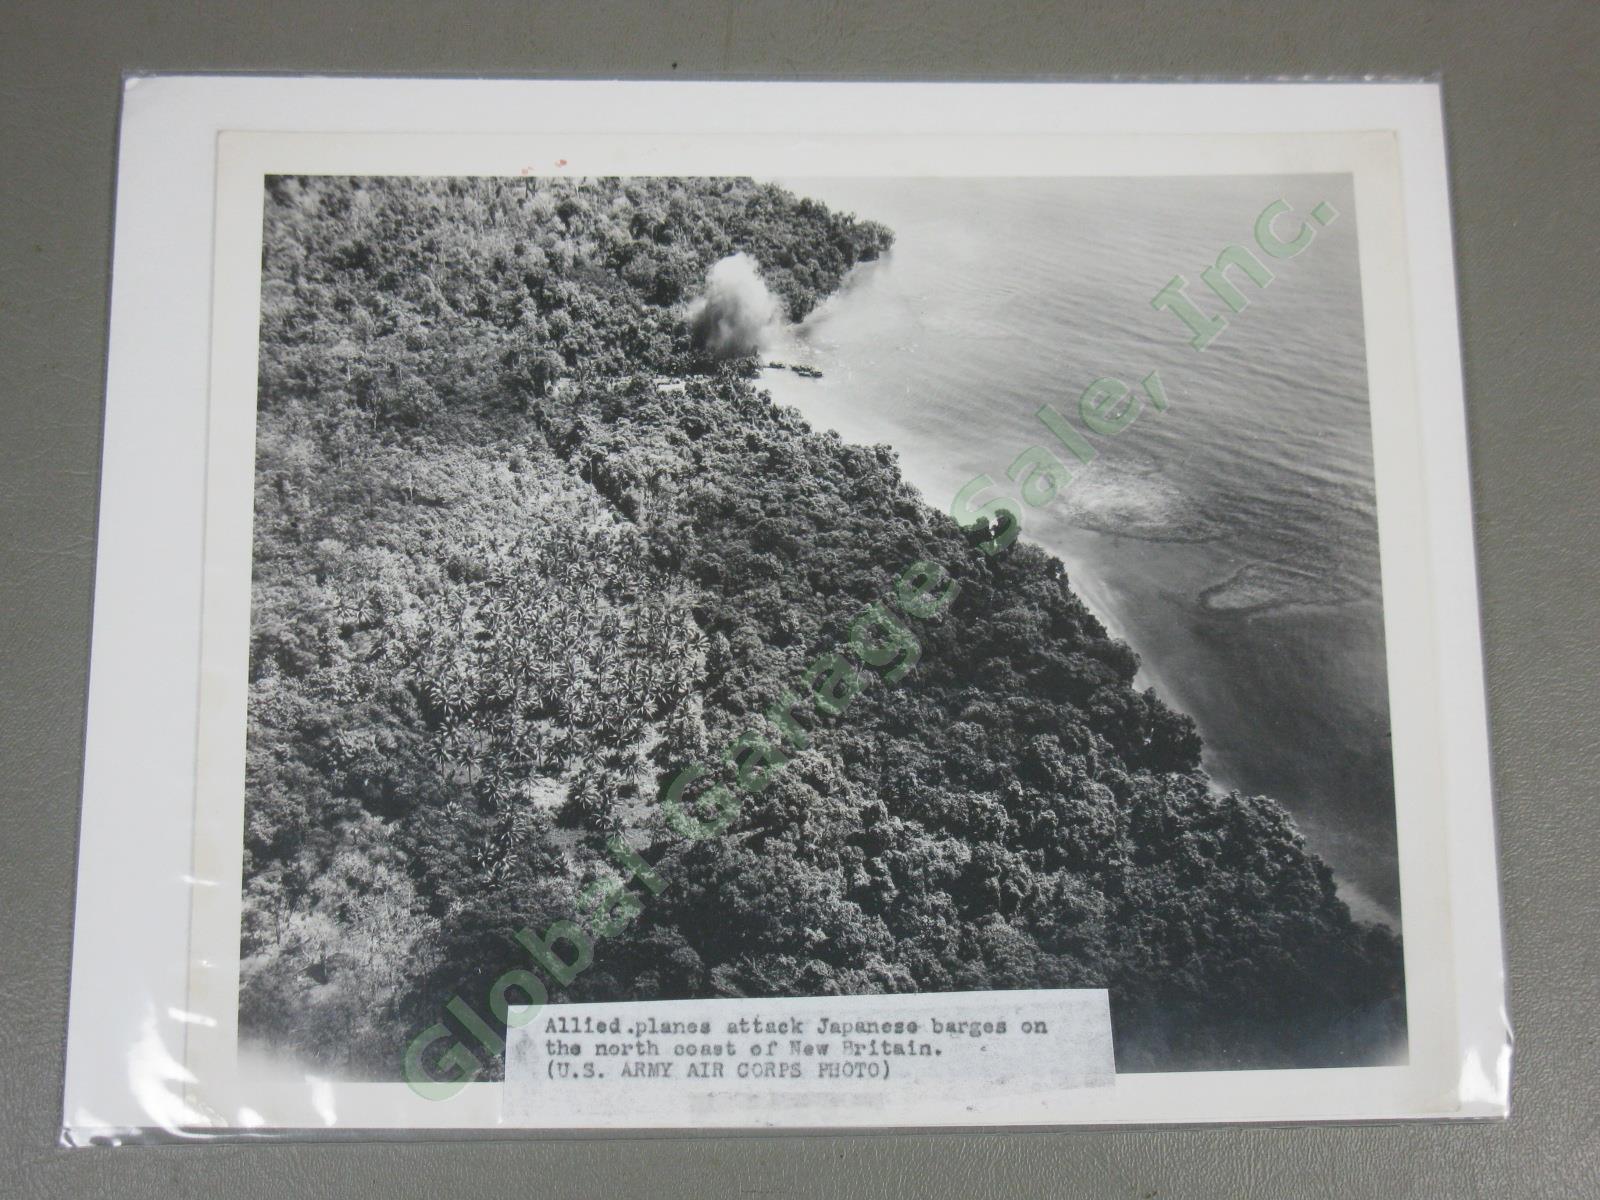 45 WWII US Army Air Force Press Photo Lot Pacific Theater General MacArthur B-25 18